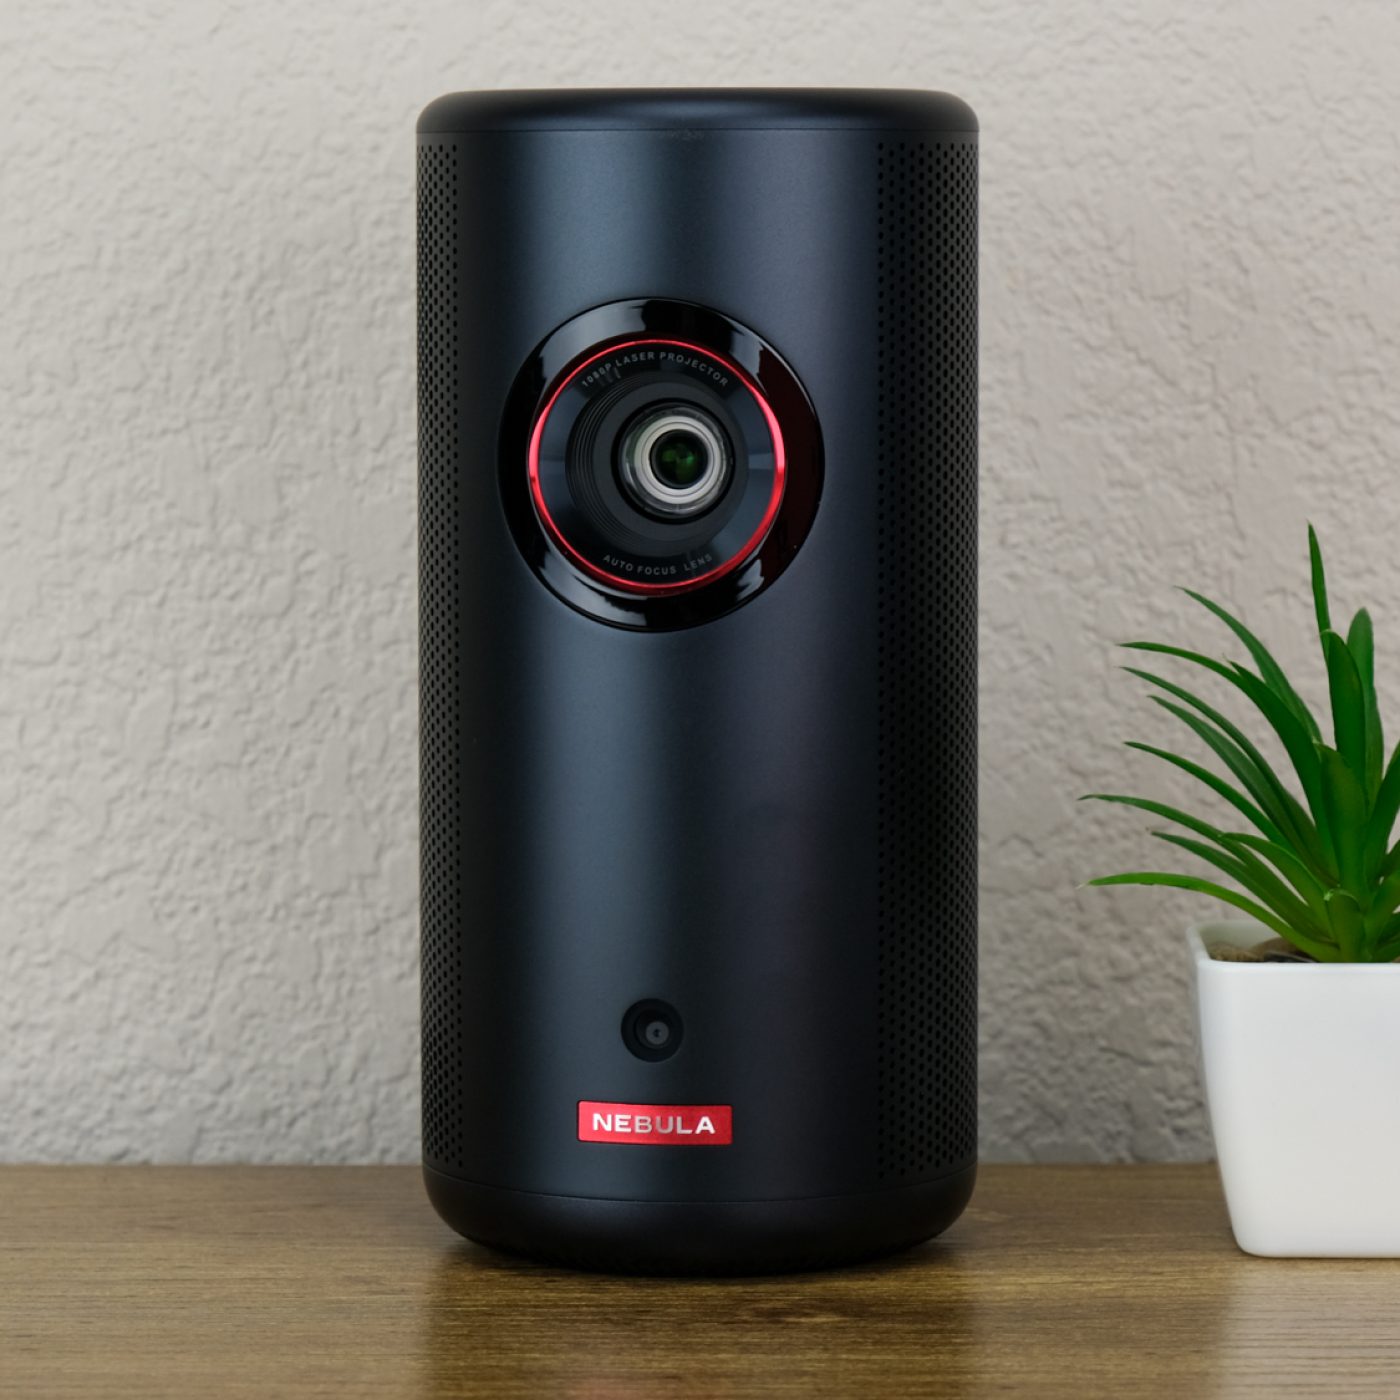 Anker Nebula Capsule 3 laser projector review: Good for the size and price